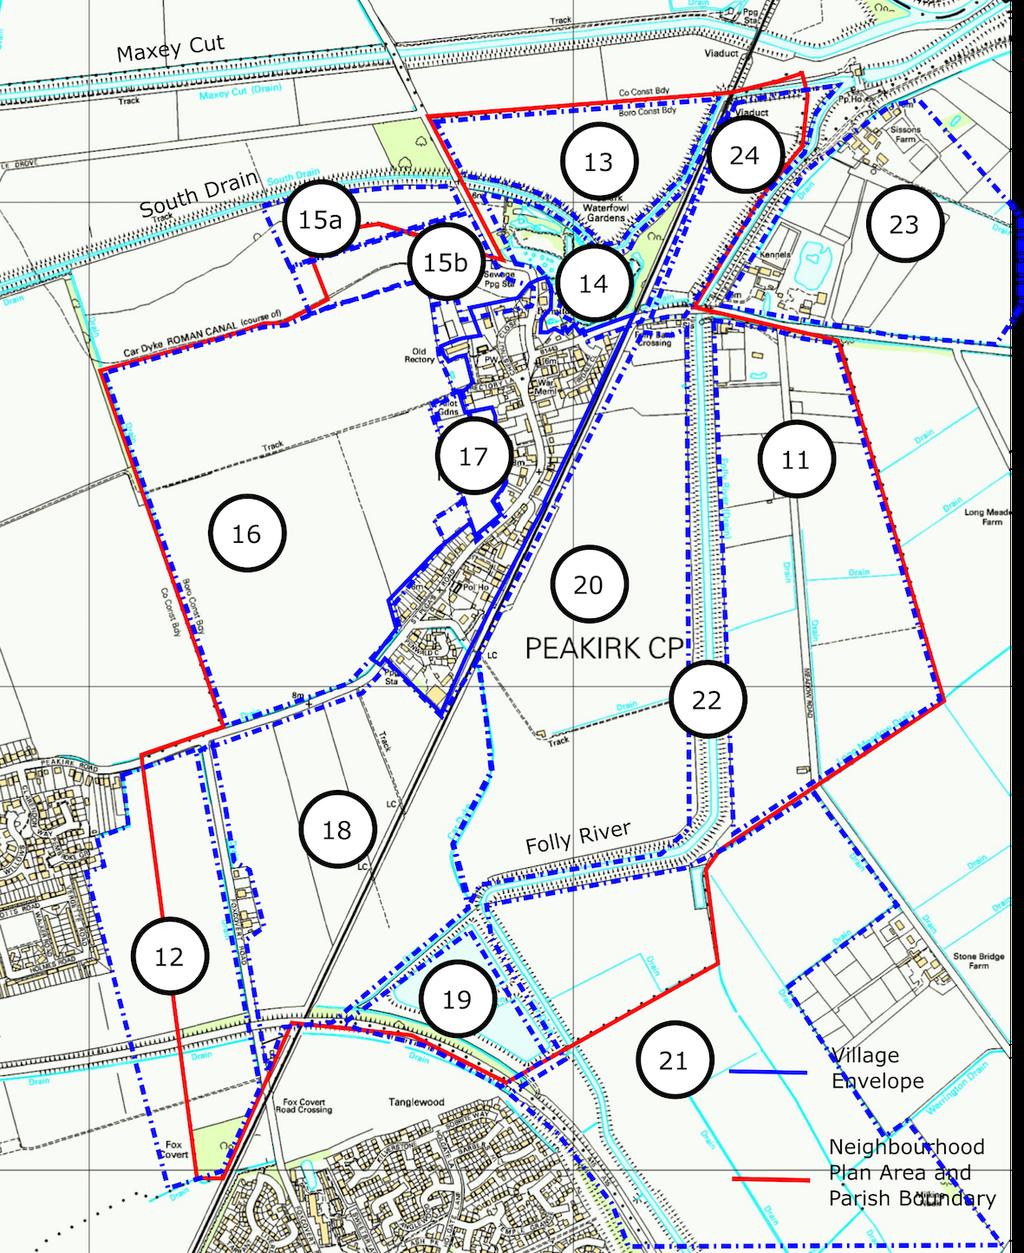 18 South of St Pegas Rd including west of Foxcovert Rd, south of Werrington parkway and east to the Car Dyke Information reviewed Historical background: SAJ ver2 June 2016 Classification Comments NCA